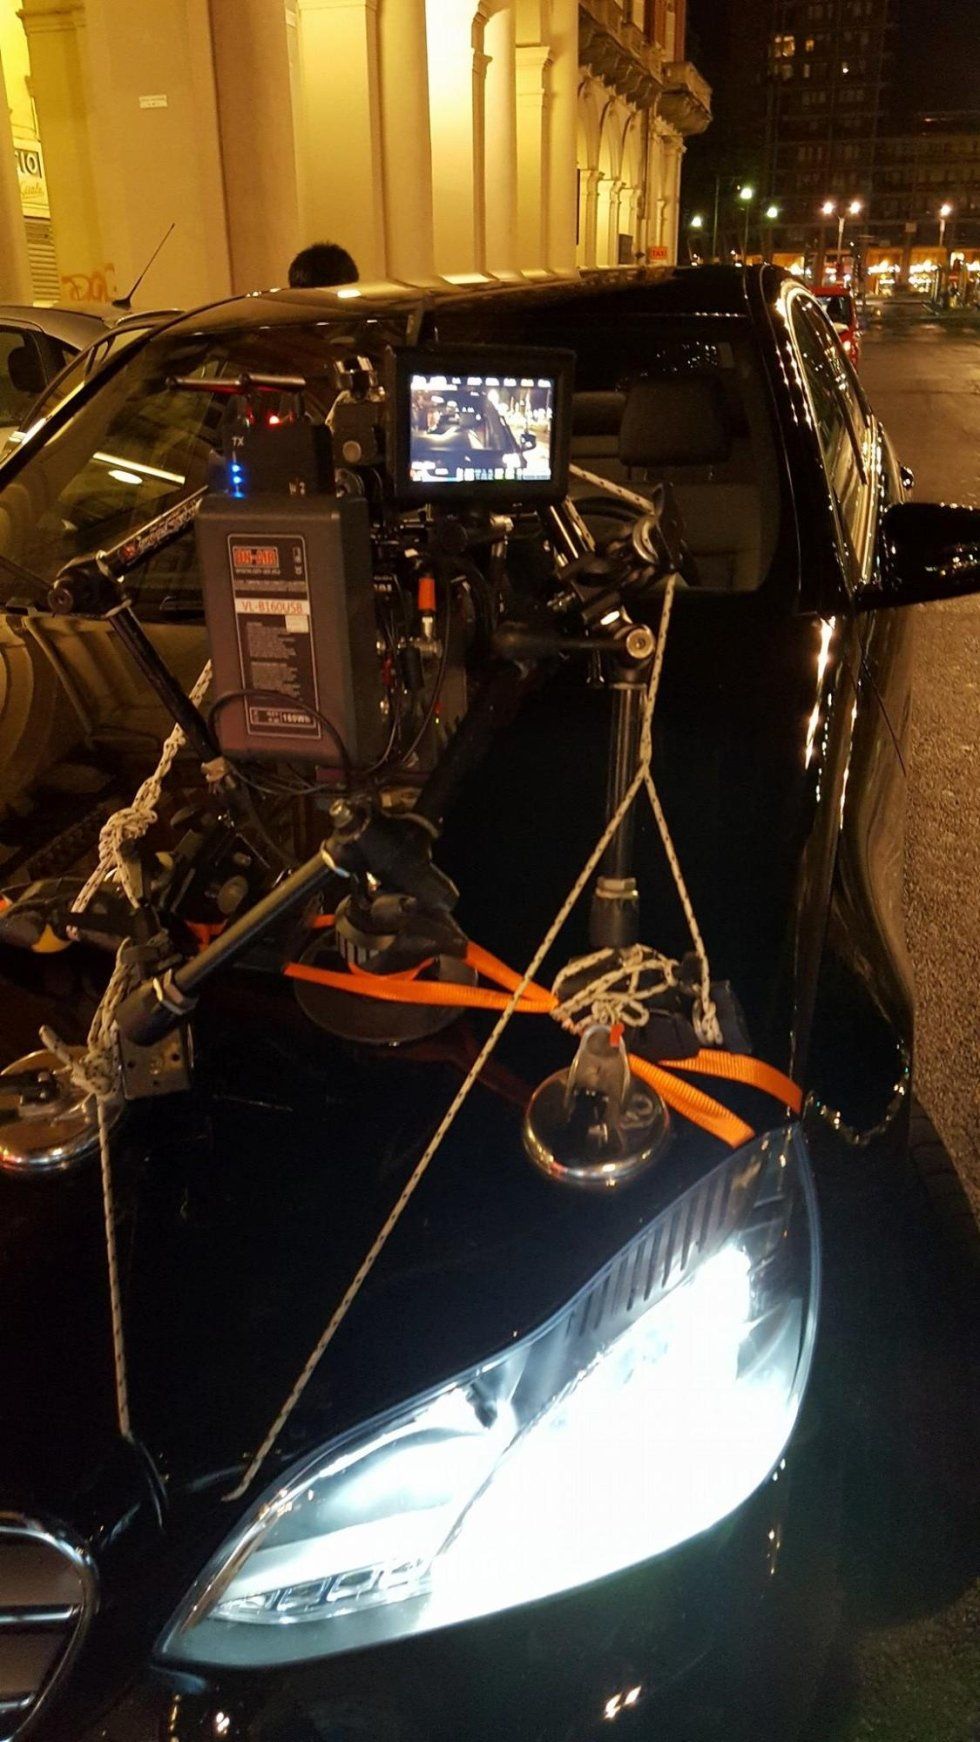 Car rental for film and TV productions